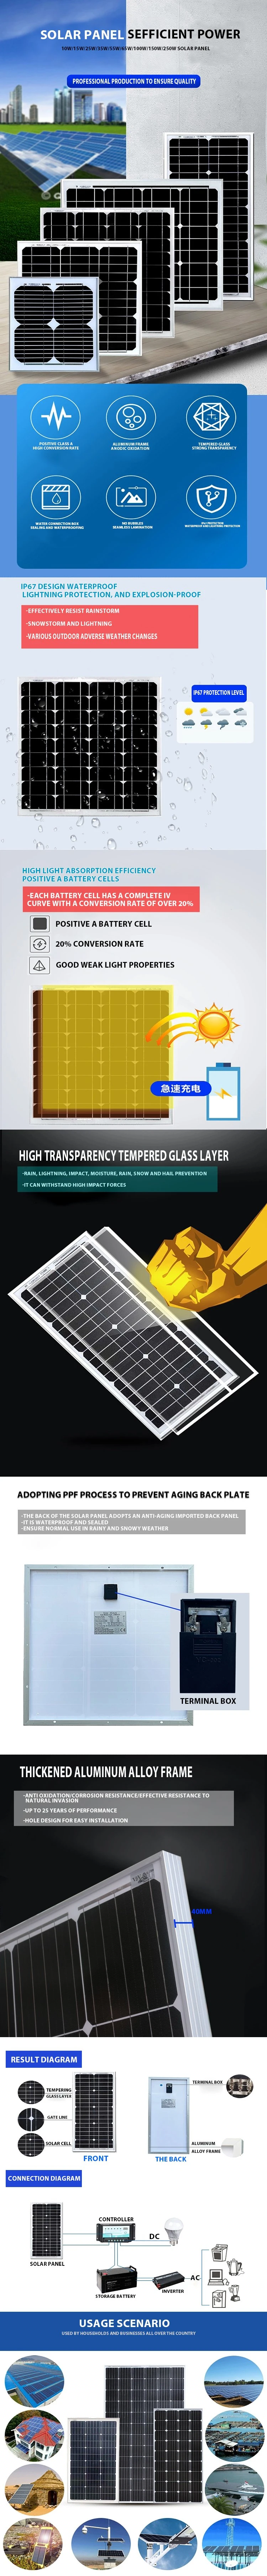 China Manufacturer 100W PV All in One Hybrid Pvt Solar Energy System